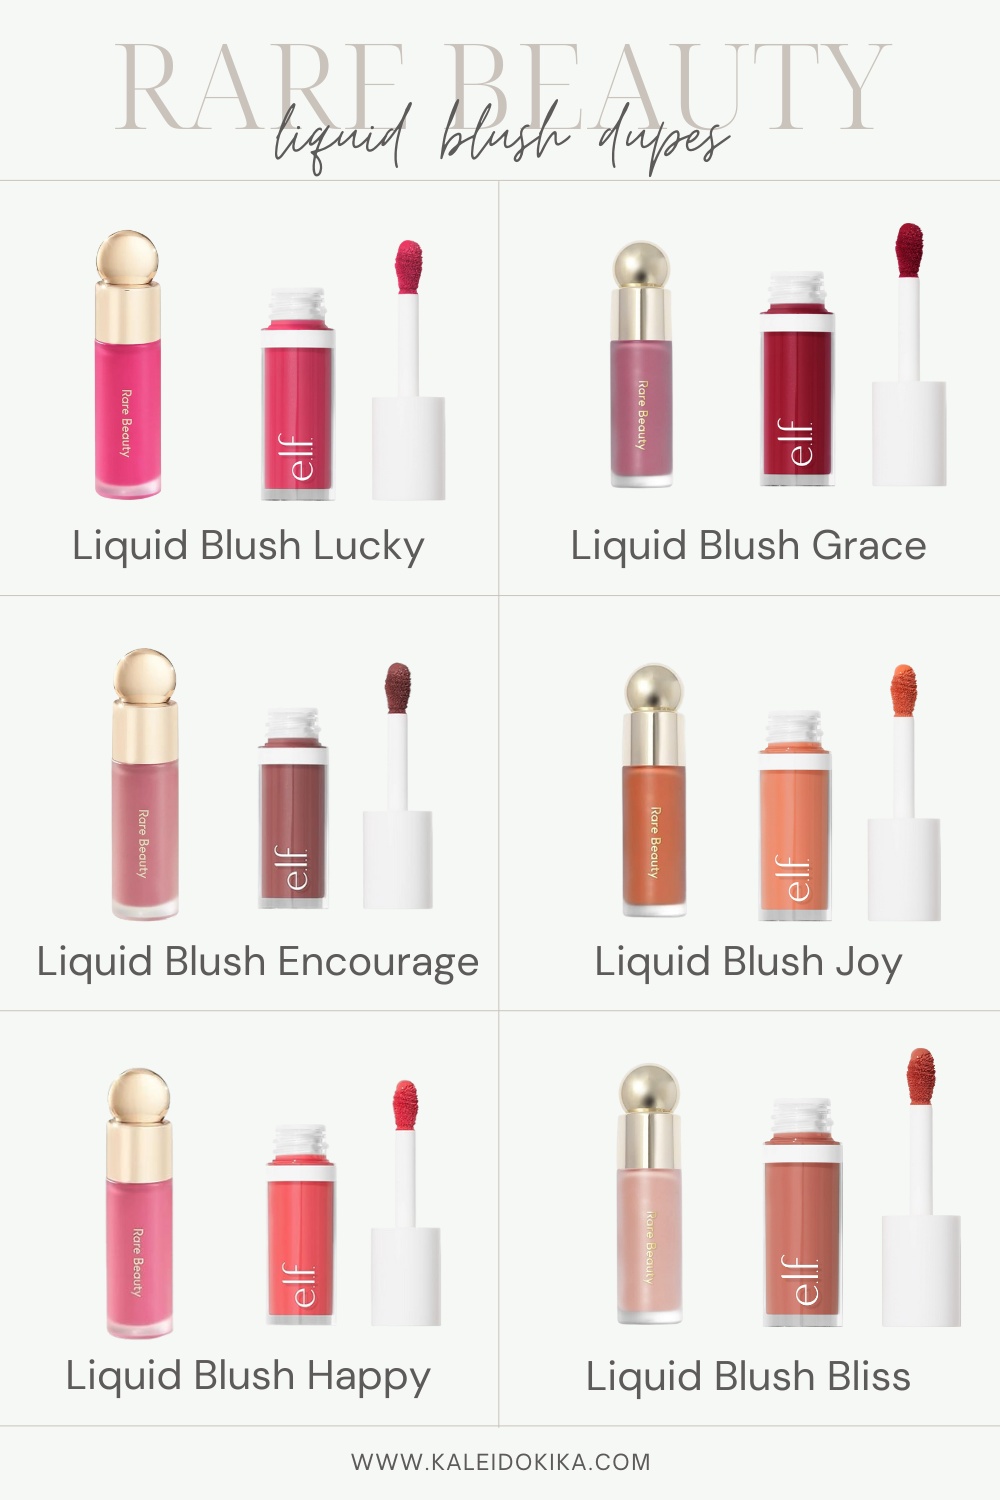 Image showing different dupes for Rare Beauty's liquid blushes